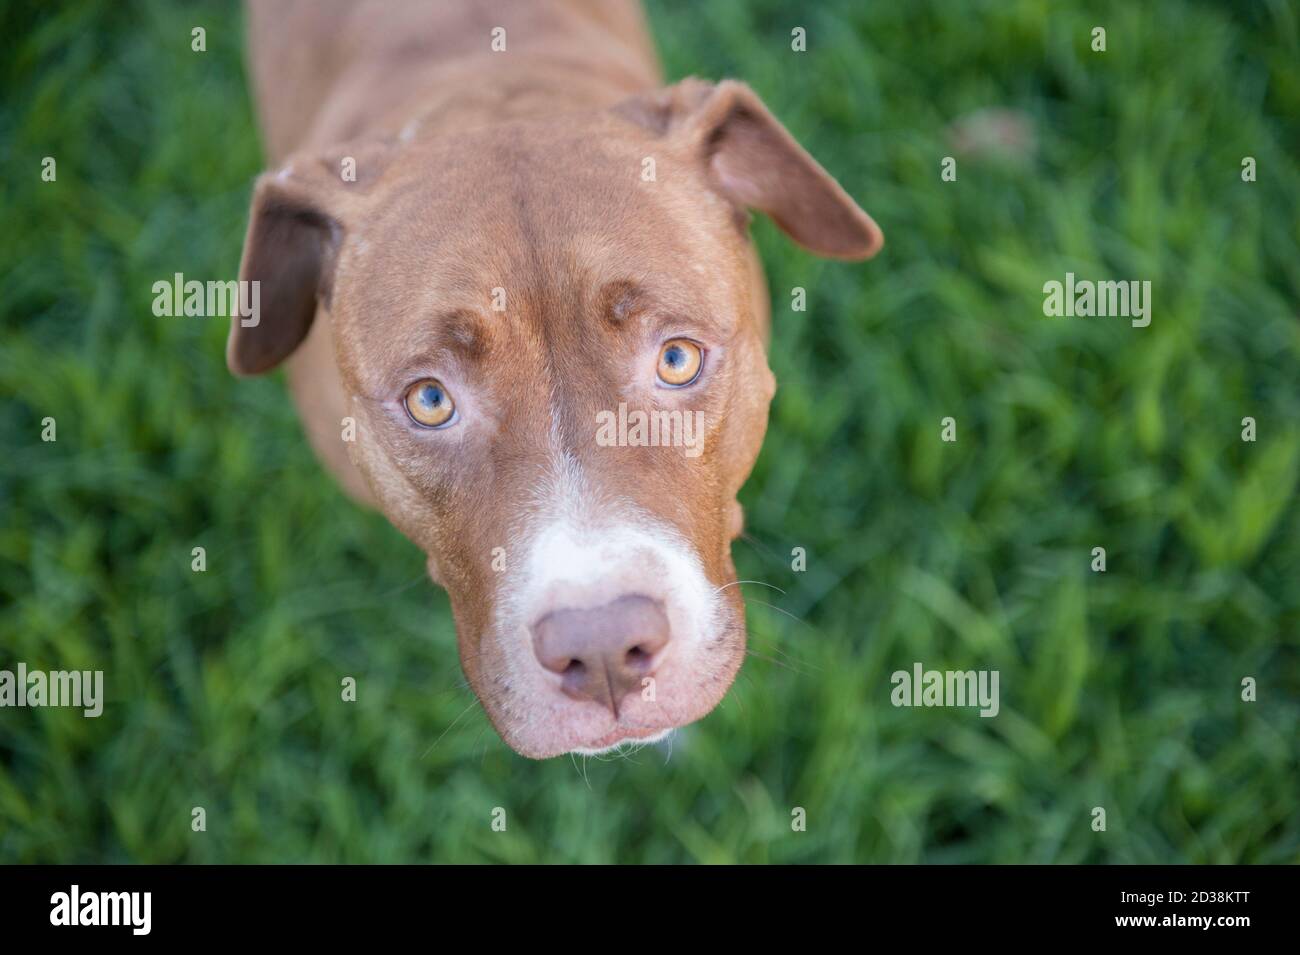 Sweet rescue pitbull dog looking up Stock Photo